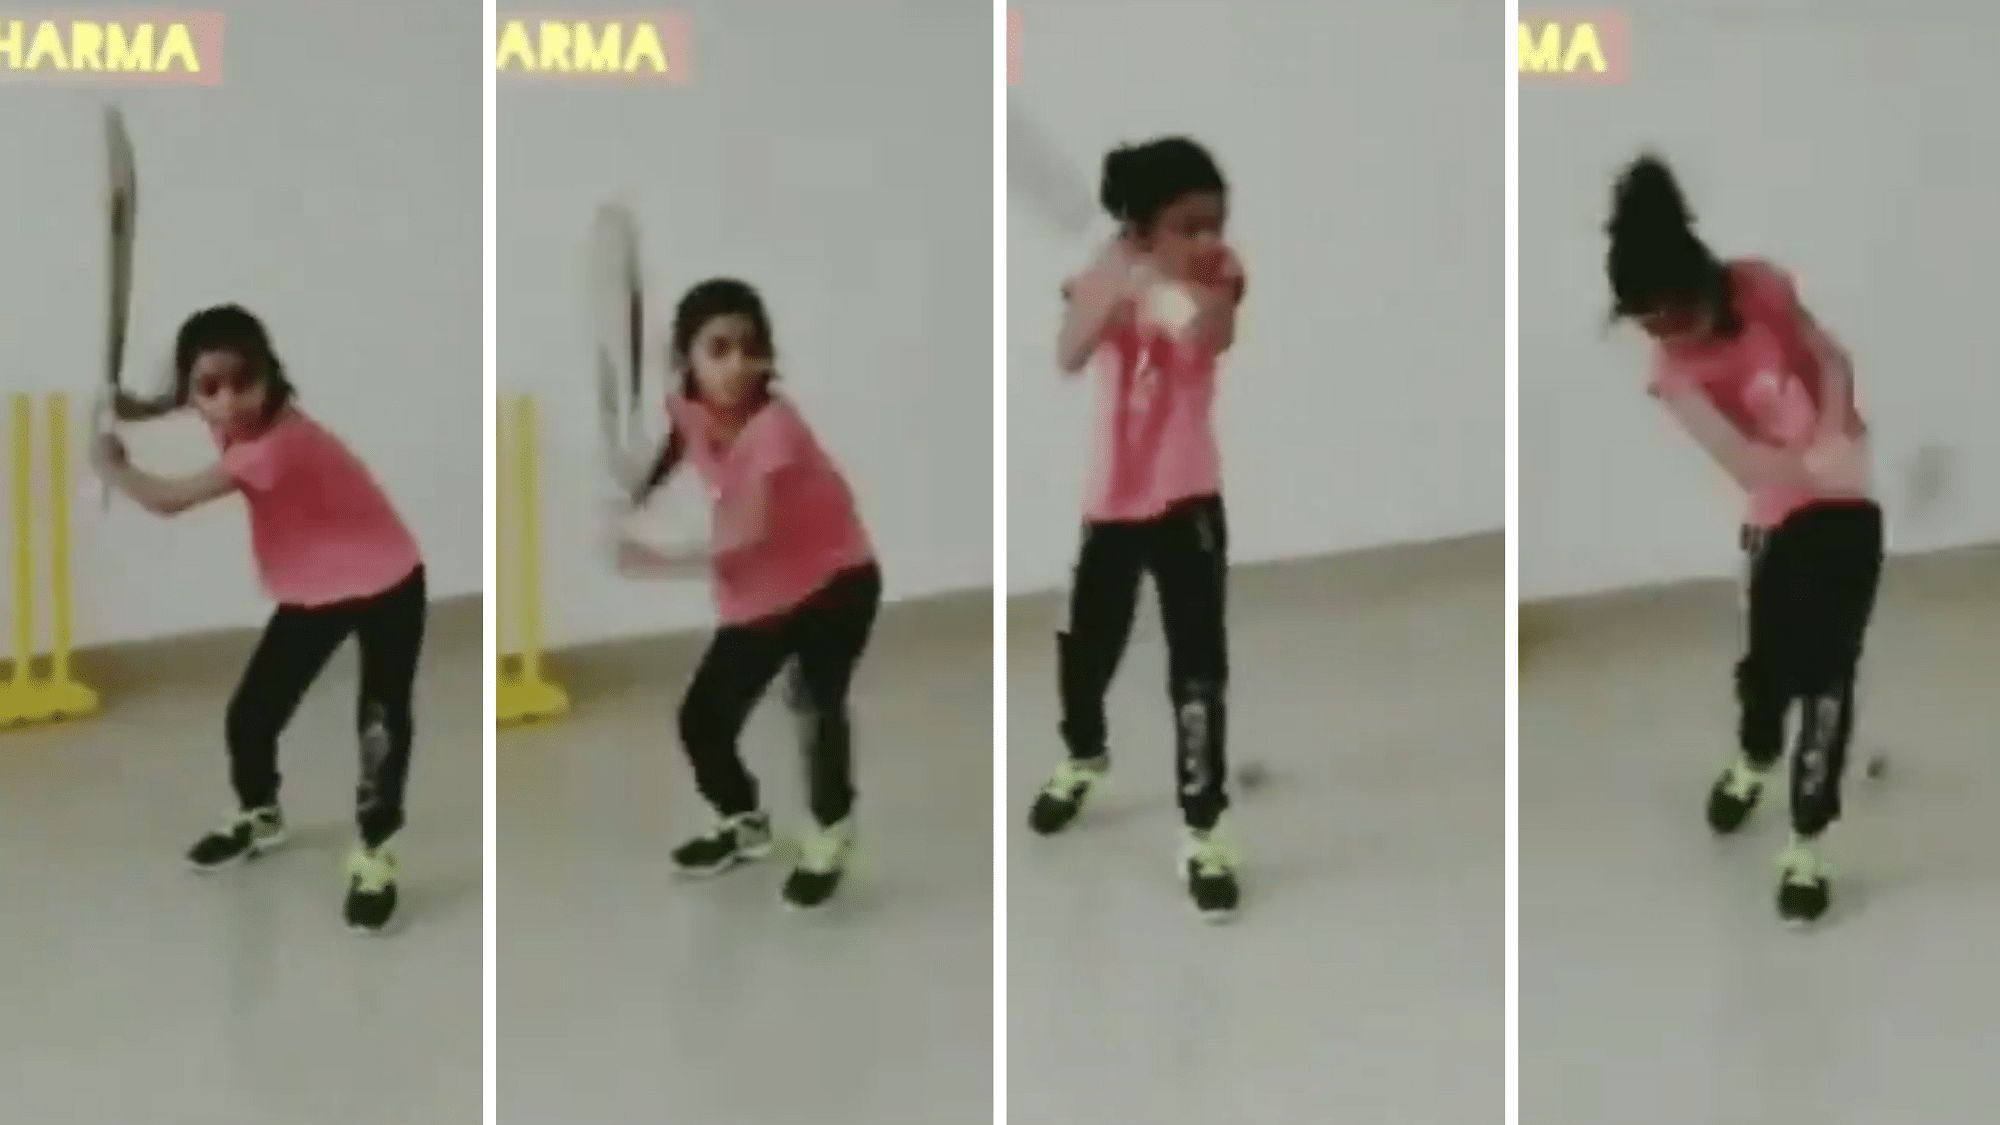 7-year-old Pari Sharma has impressed all with her helicopter shots.